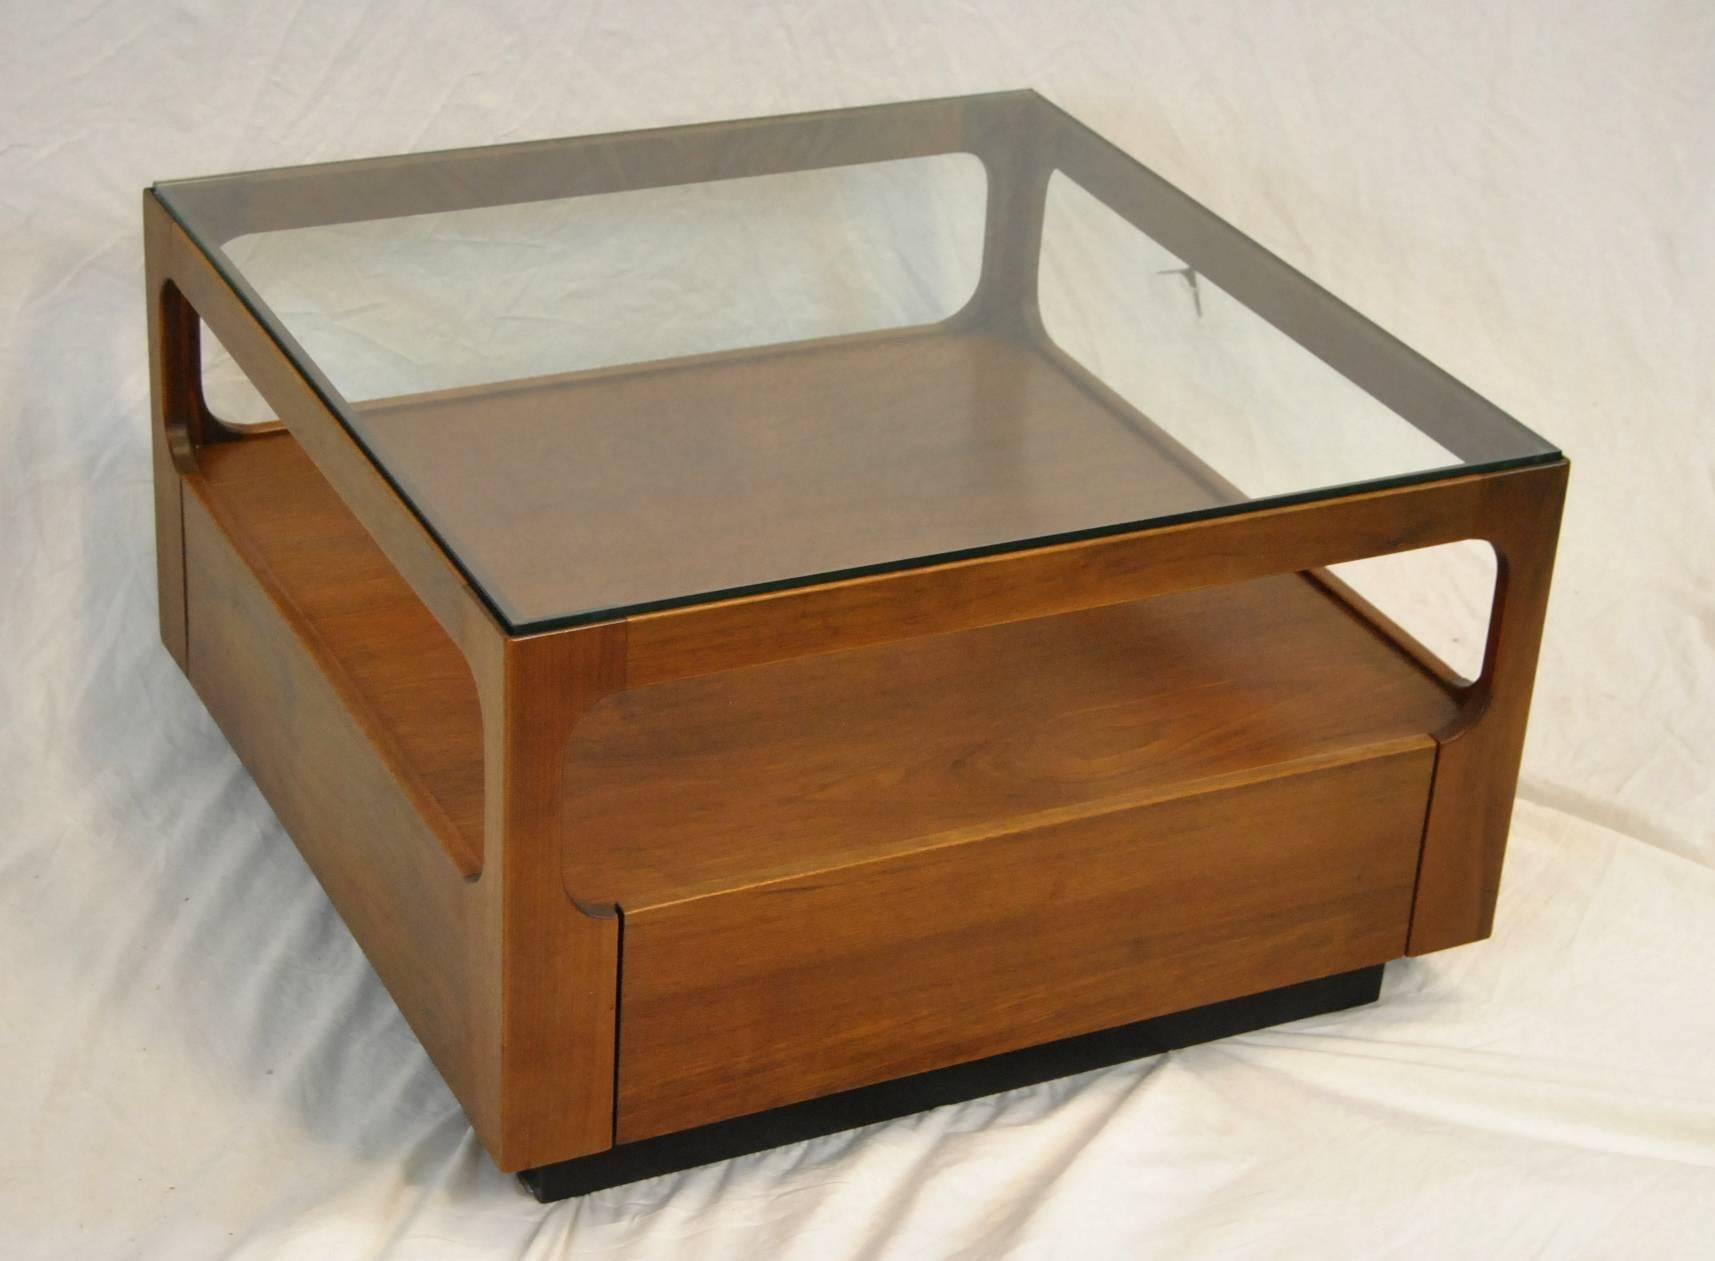 A classic Mid-Century teak coffee table with glass top designed by John Keal for Brown Saltman. Table is 30